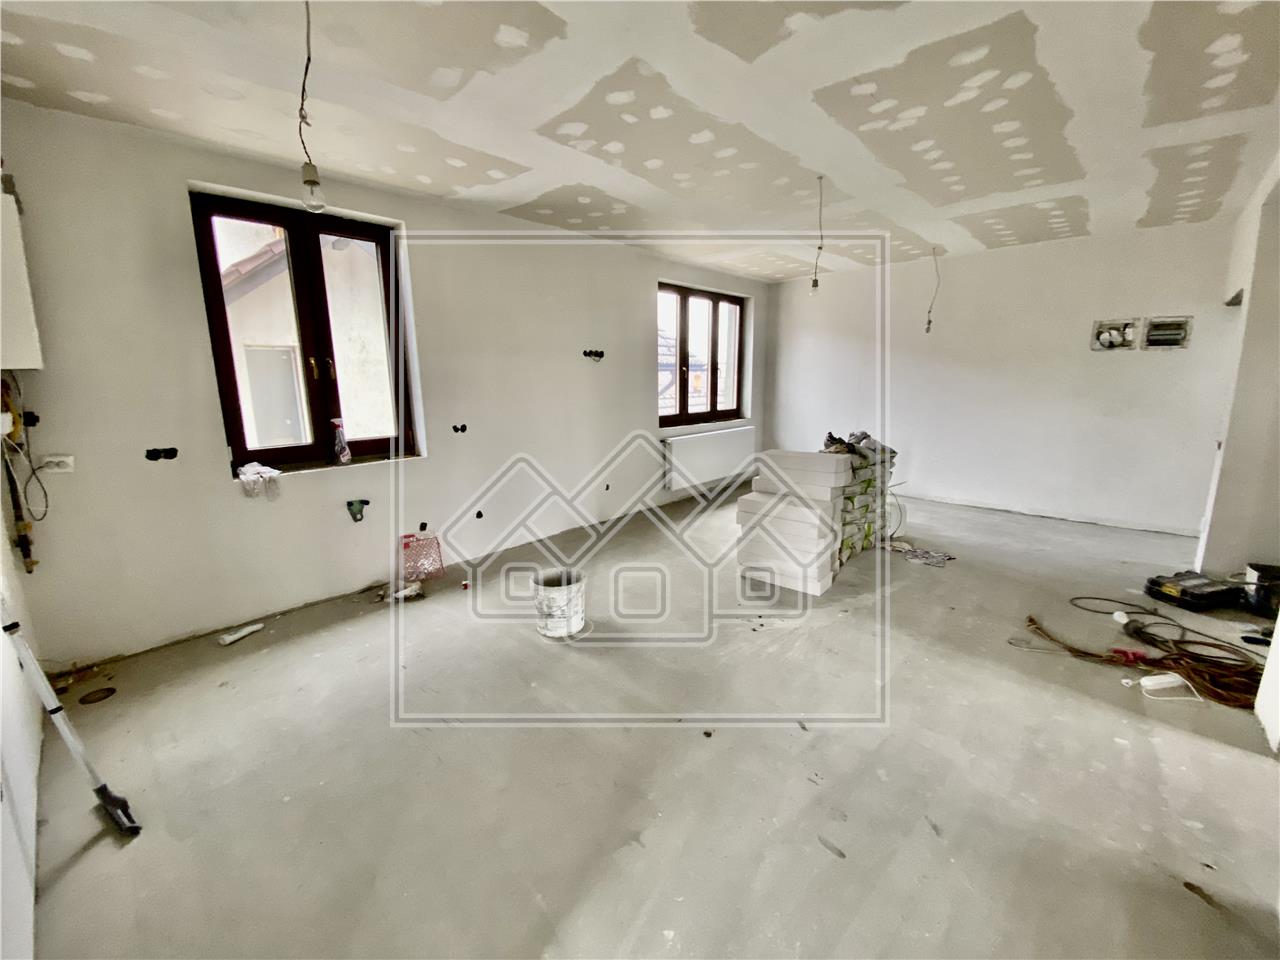 House for sale in Sibiu - 4 apartments - land 640 sqm - Lazaret area